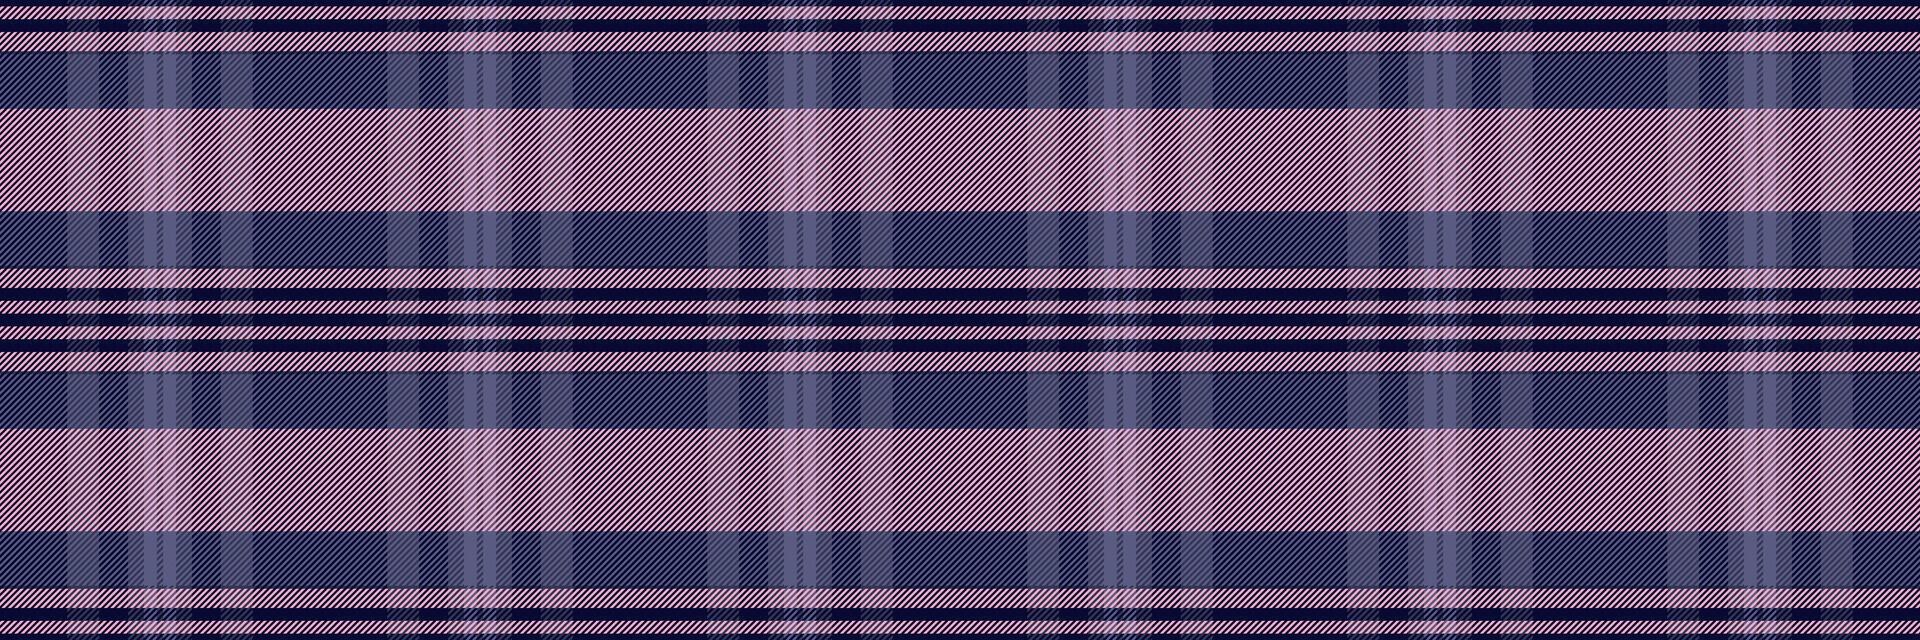 Loft plaid fabric texture, lumberjack tartan pattern vector. Swatch textile check background seamless in blue and dark colors. vector